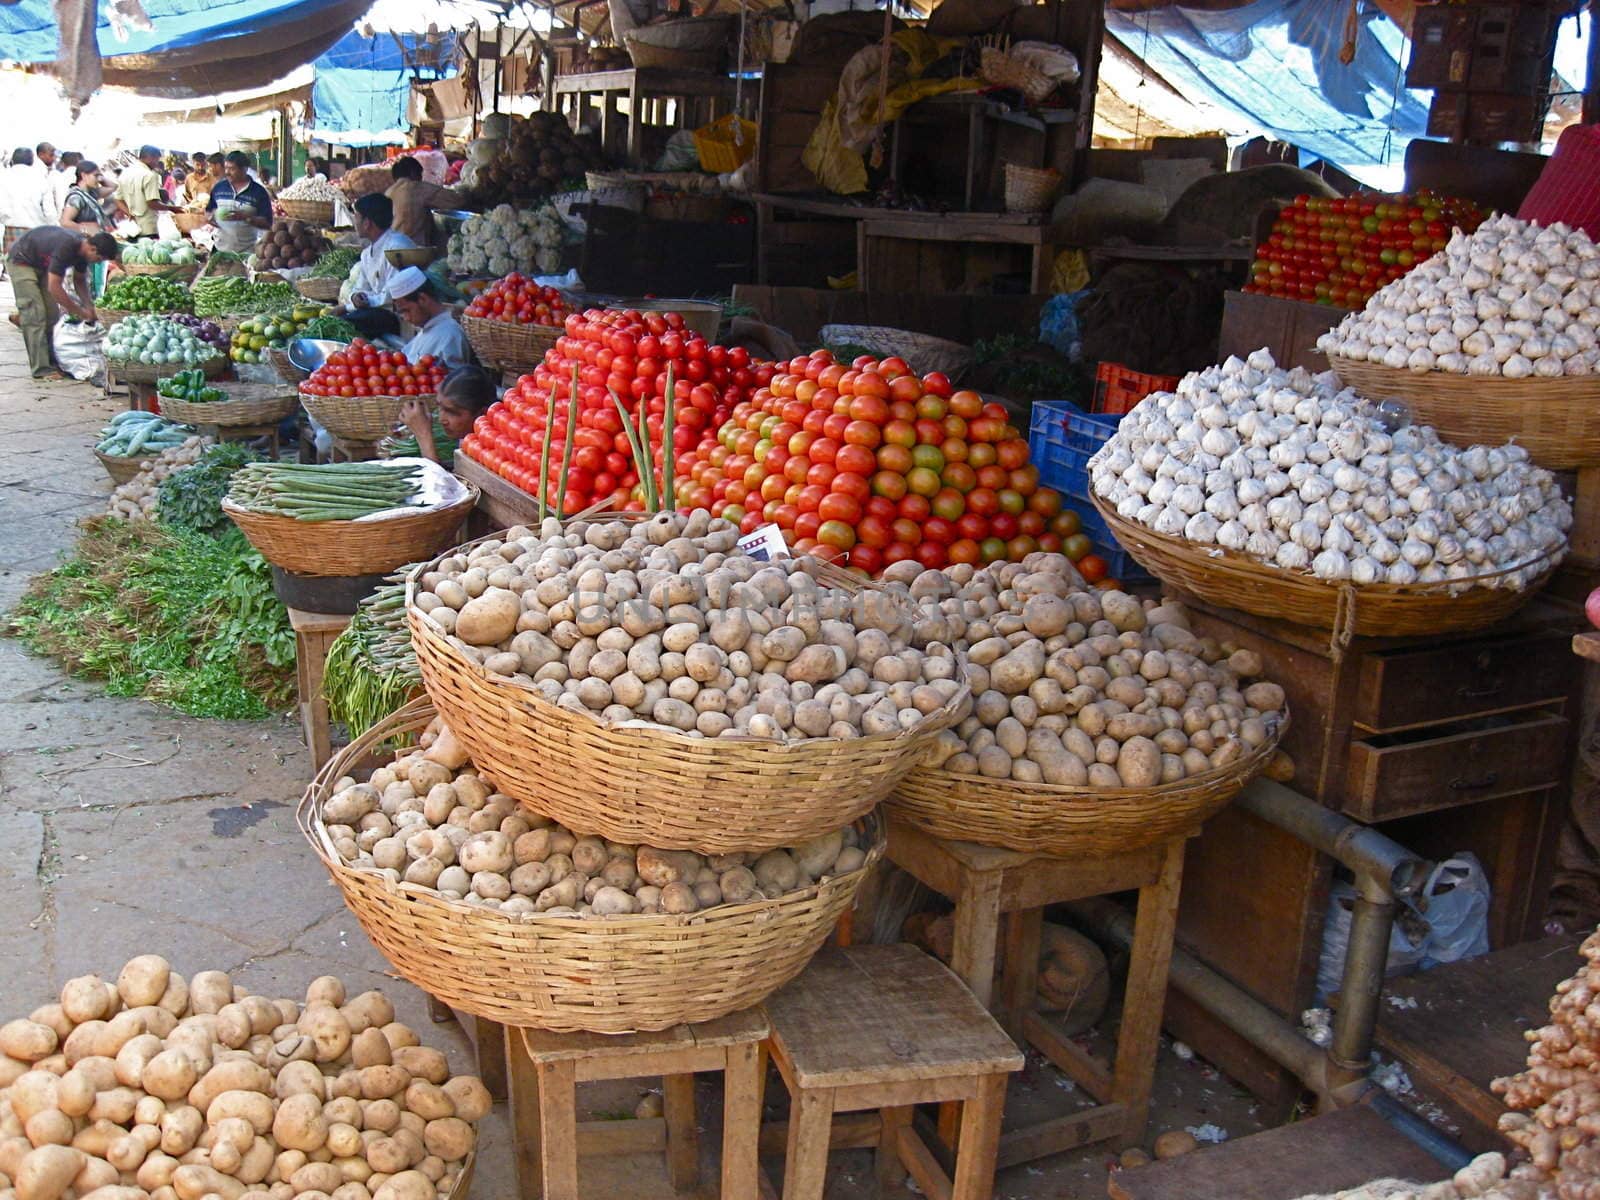 A vegetable stall in India